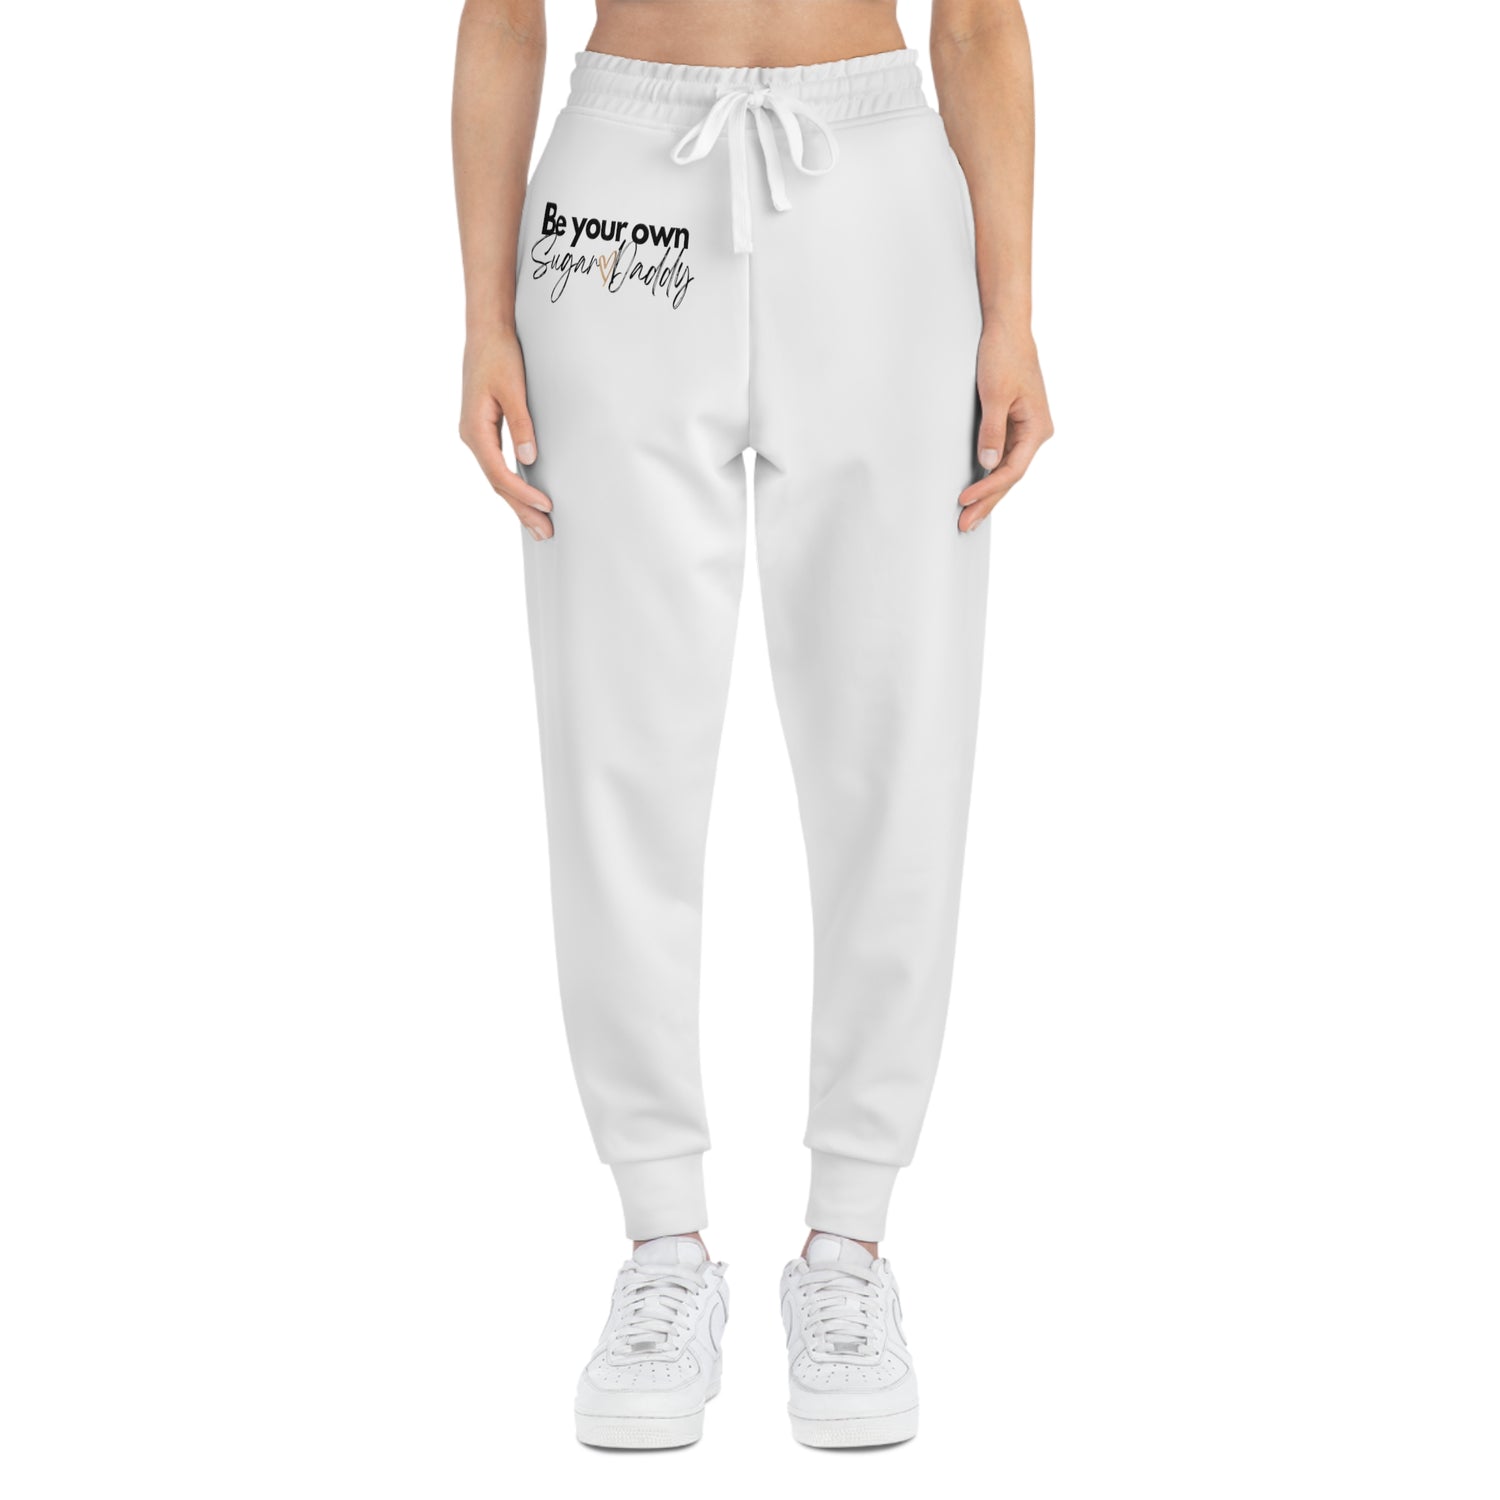 Be Your Own Sugar Daddy Joggers - Comfort Meets Empowerment!